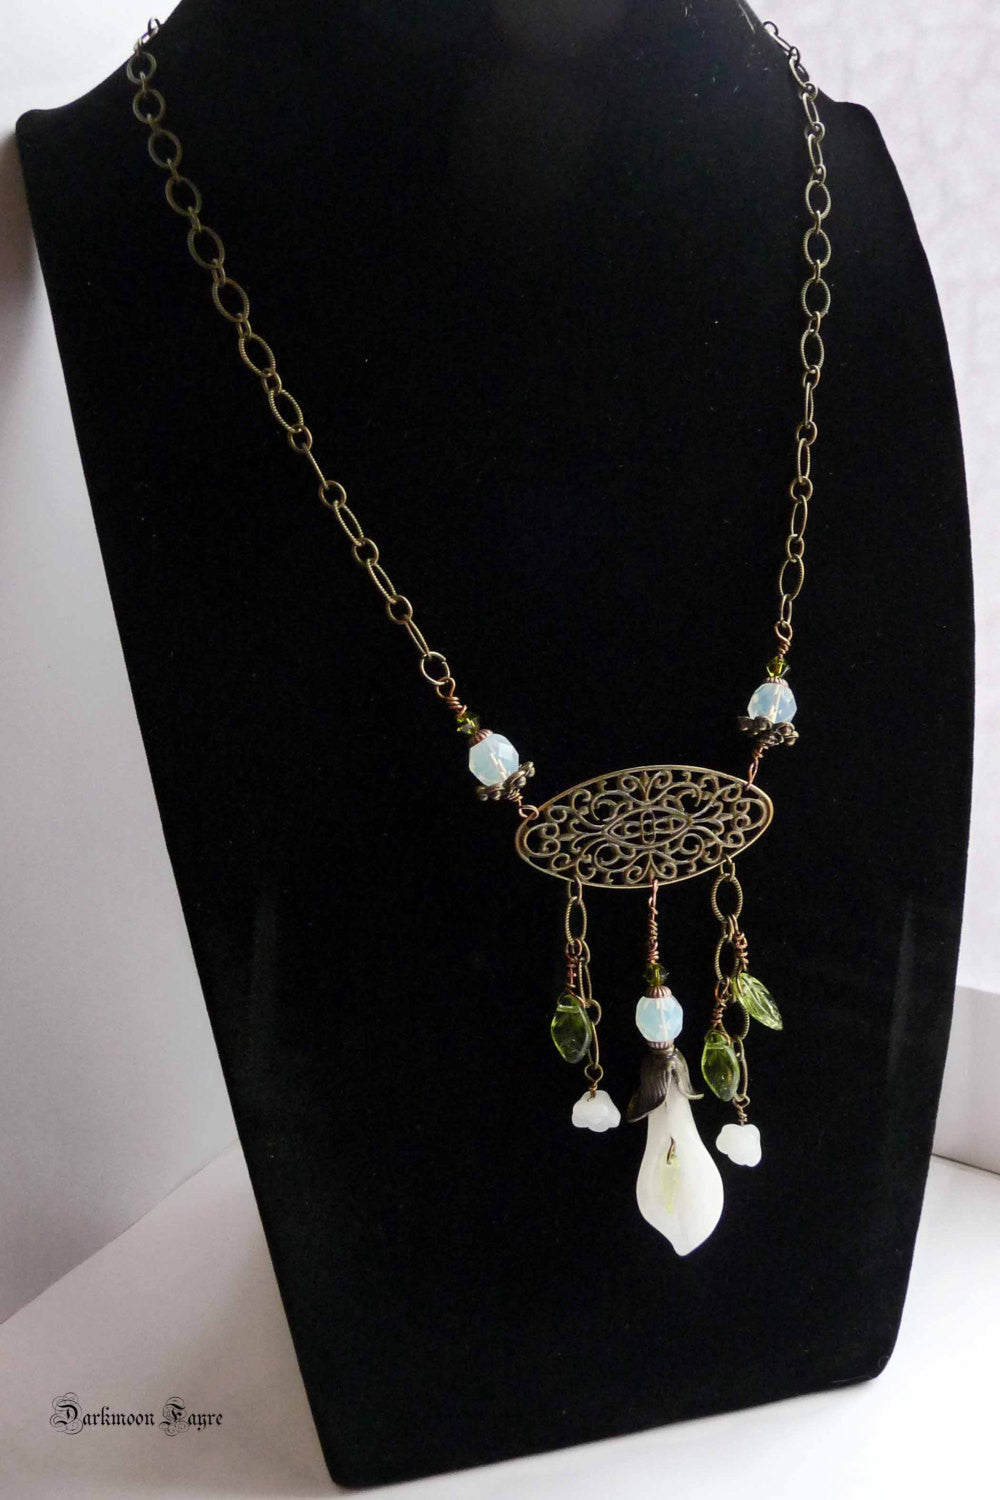 White Jade Calla Lilly Negligee Necklace. Art Nouveau inspired in antiqued bronze filigree. - Darkmoon Fayre